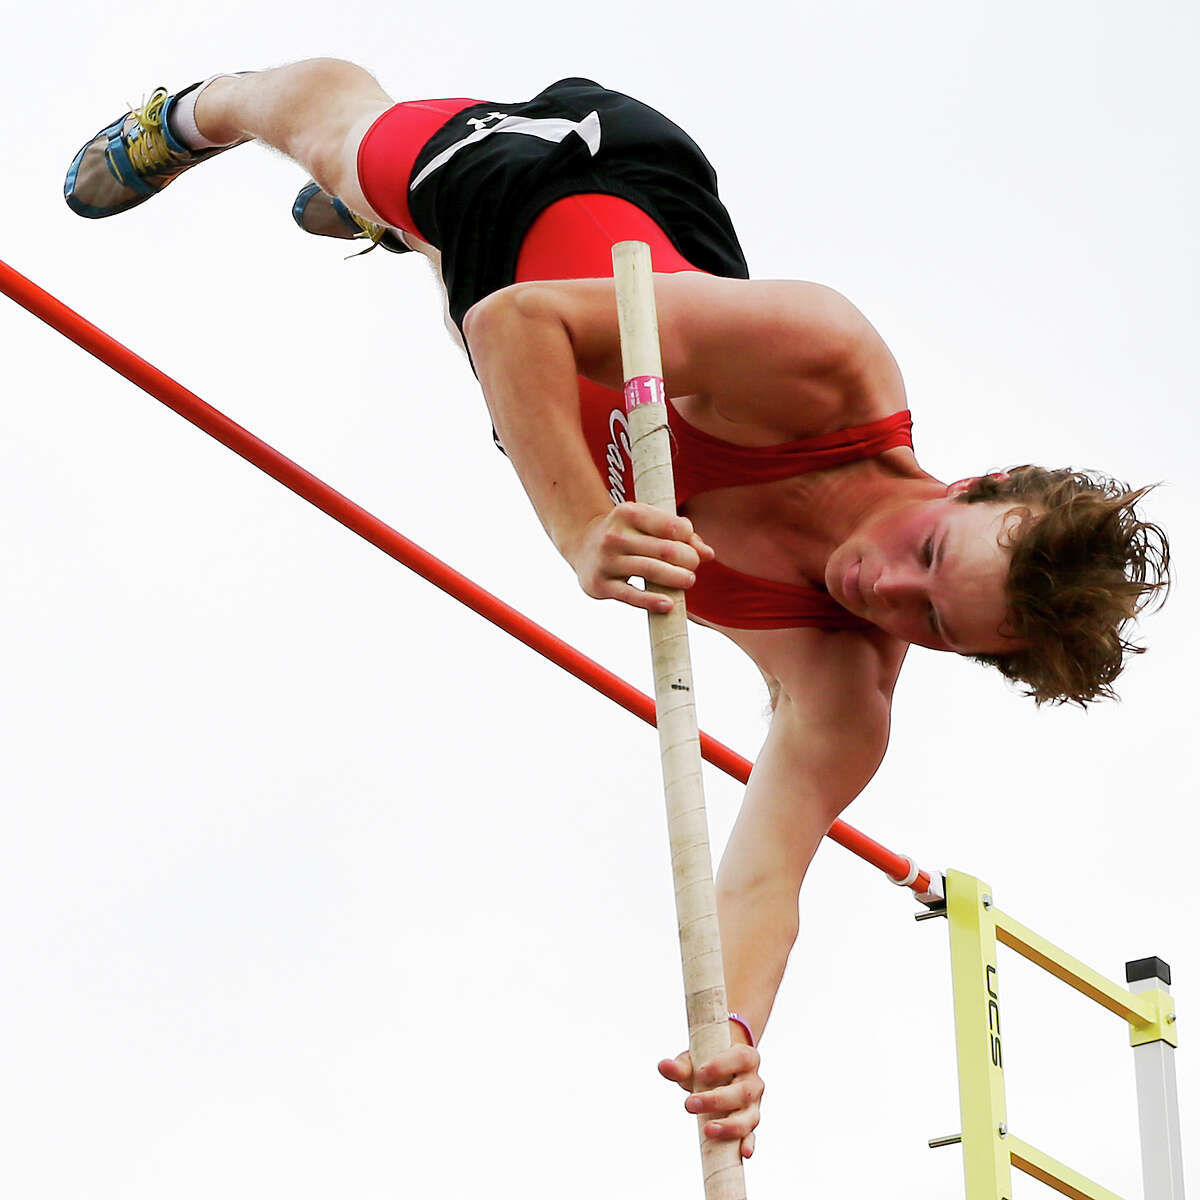 New Braunfels Canyon's Bailey Henderson clears 12 feet, 6 inches to set a new regional record in the 6A boys pole vault during the Region IV-6A track and field championships at Alamo Stadium on Friday, April 29, 2016. MARVIN PFEIFFER/ mpfeiffer@express-news.net